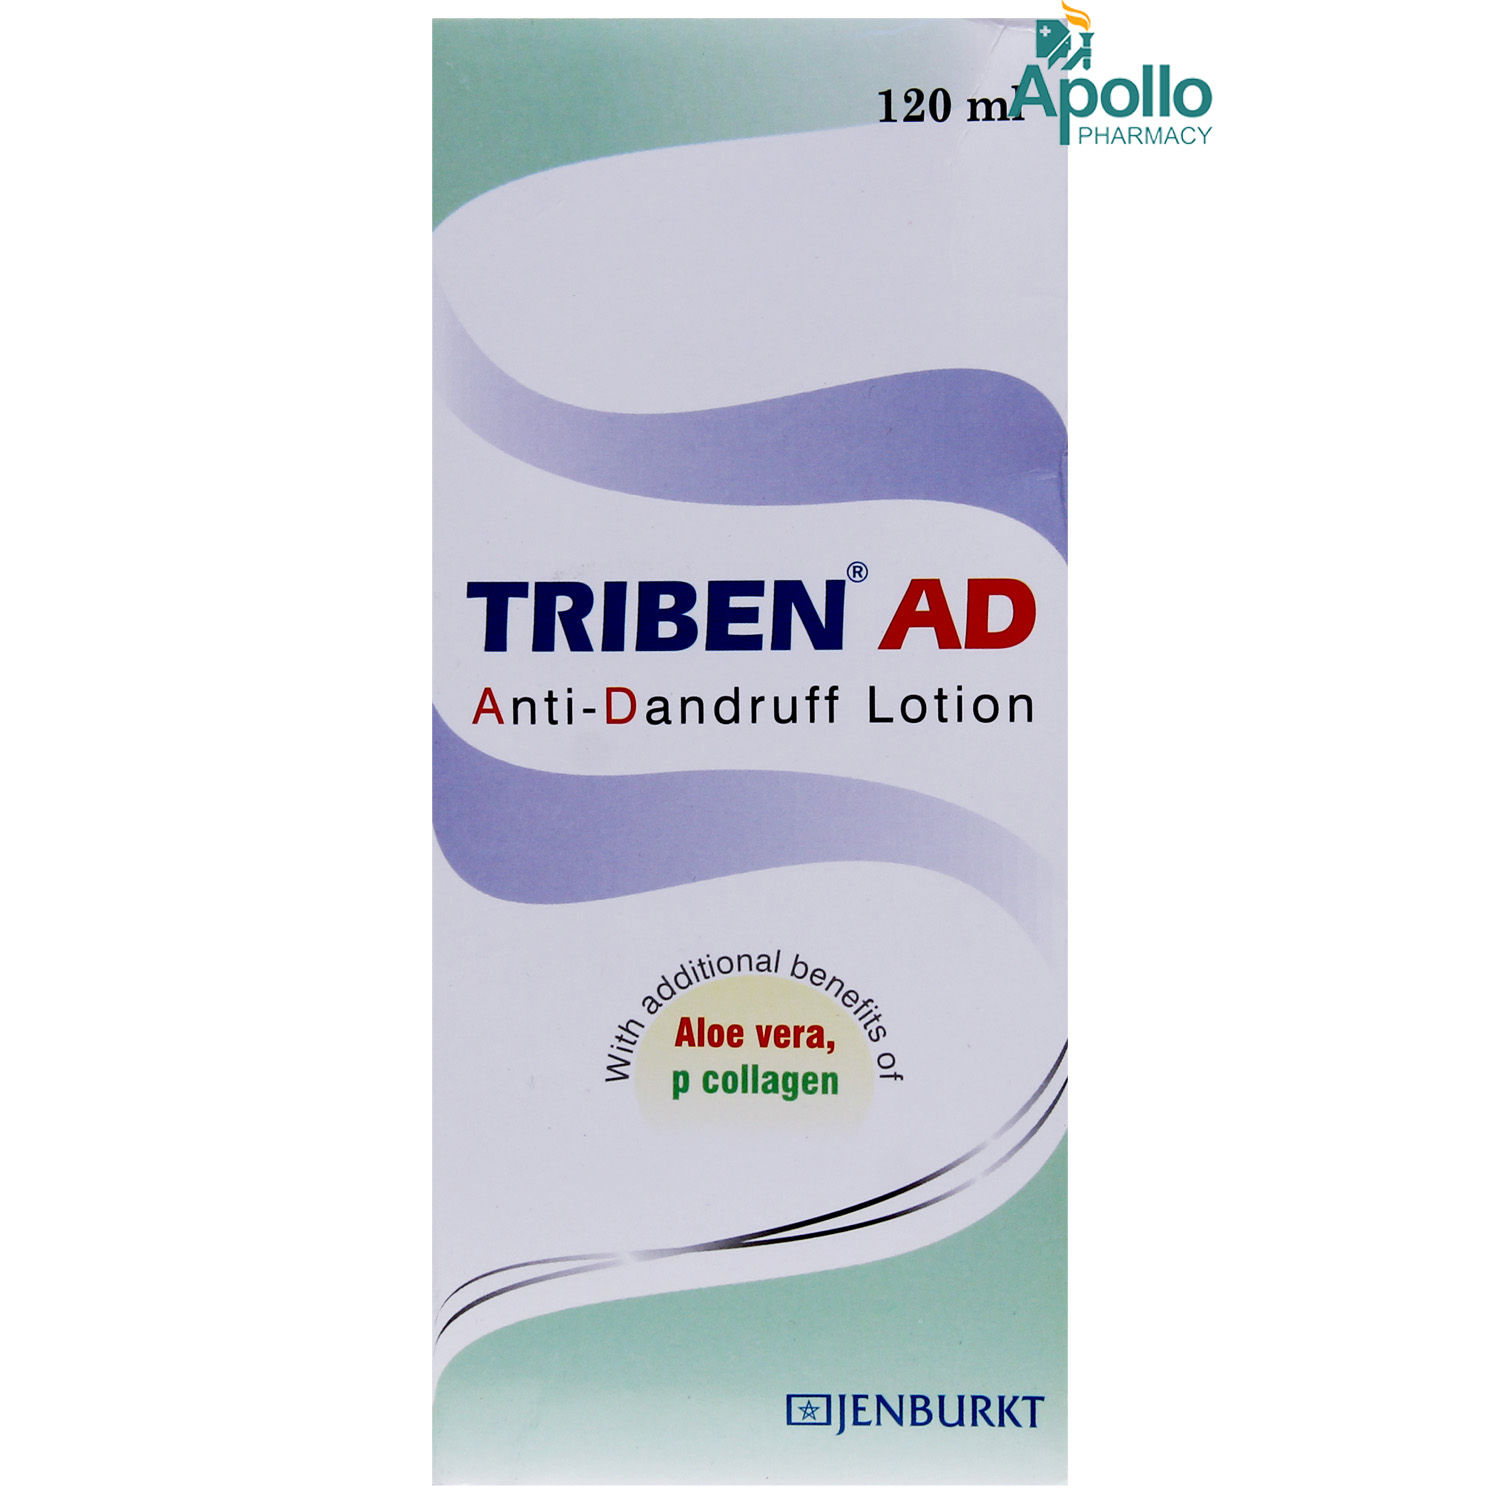 Triben AD Lotion 120 ml Price, Uses, Side Effects, Composition - Apollo  Pharmacy